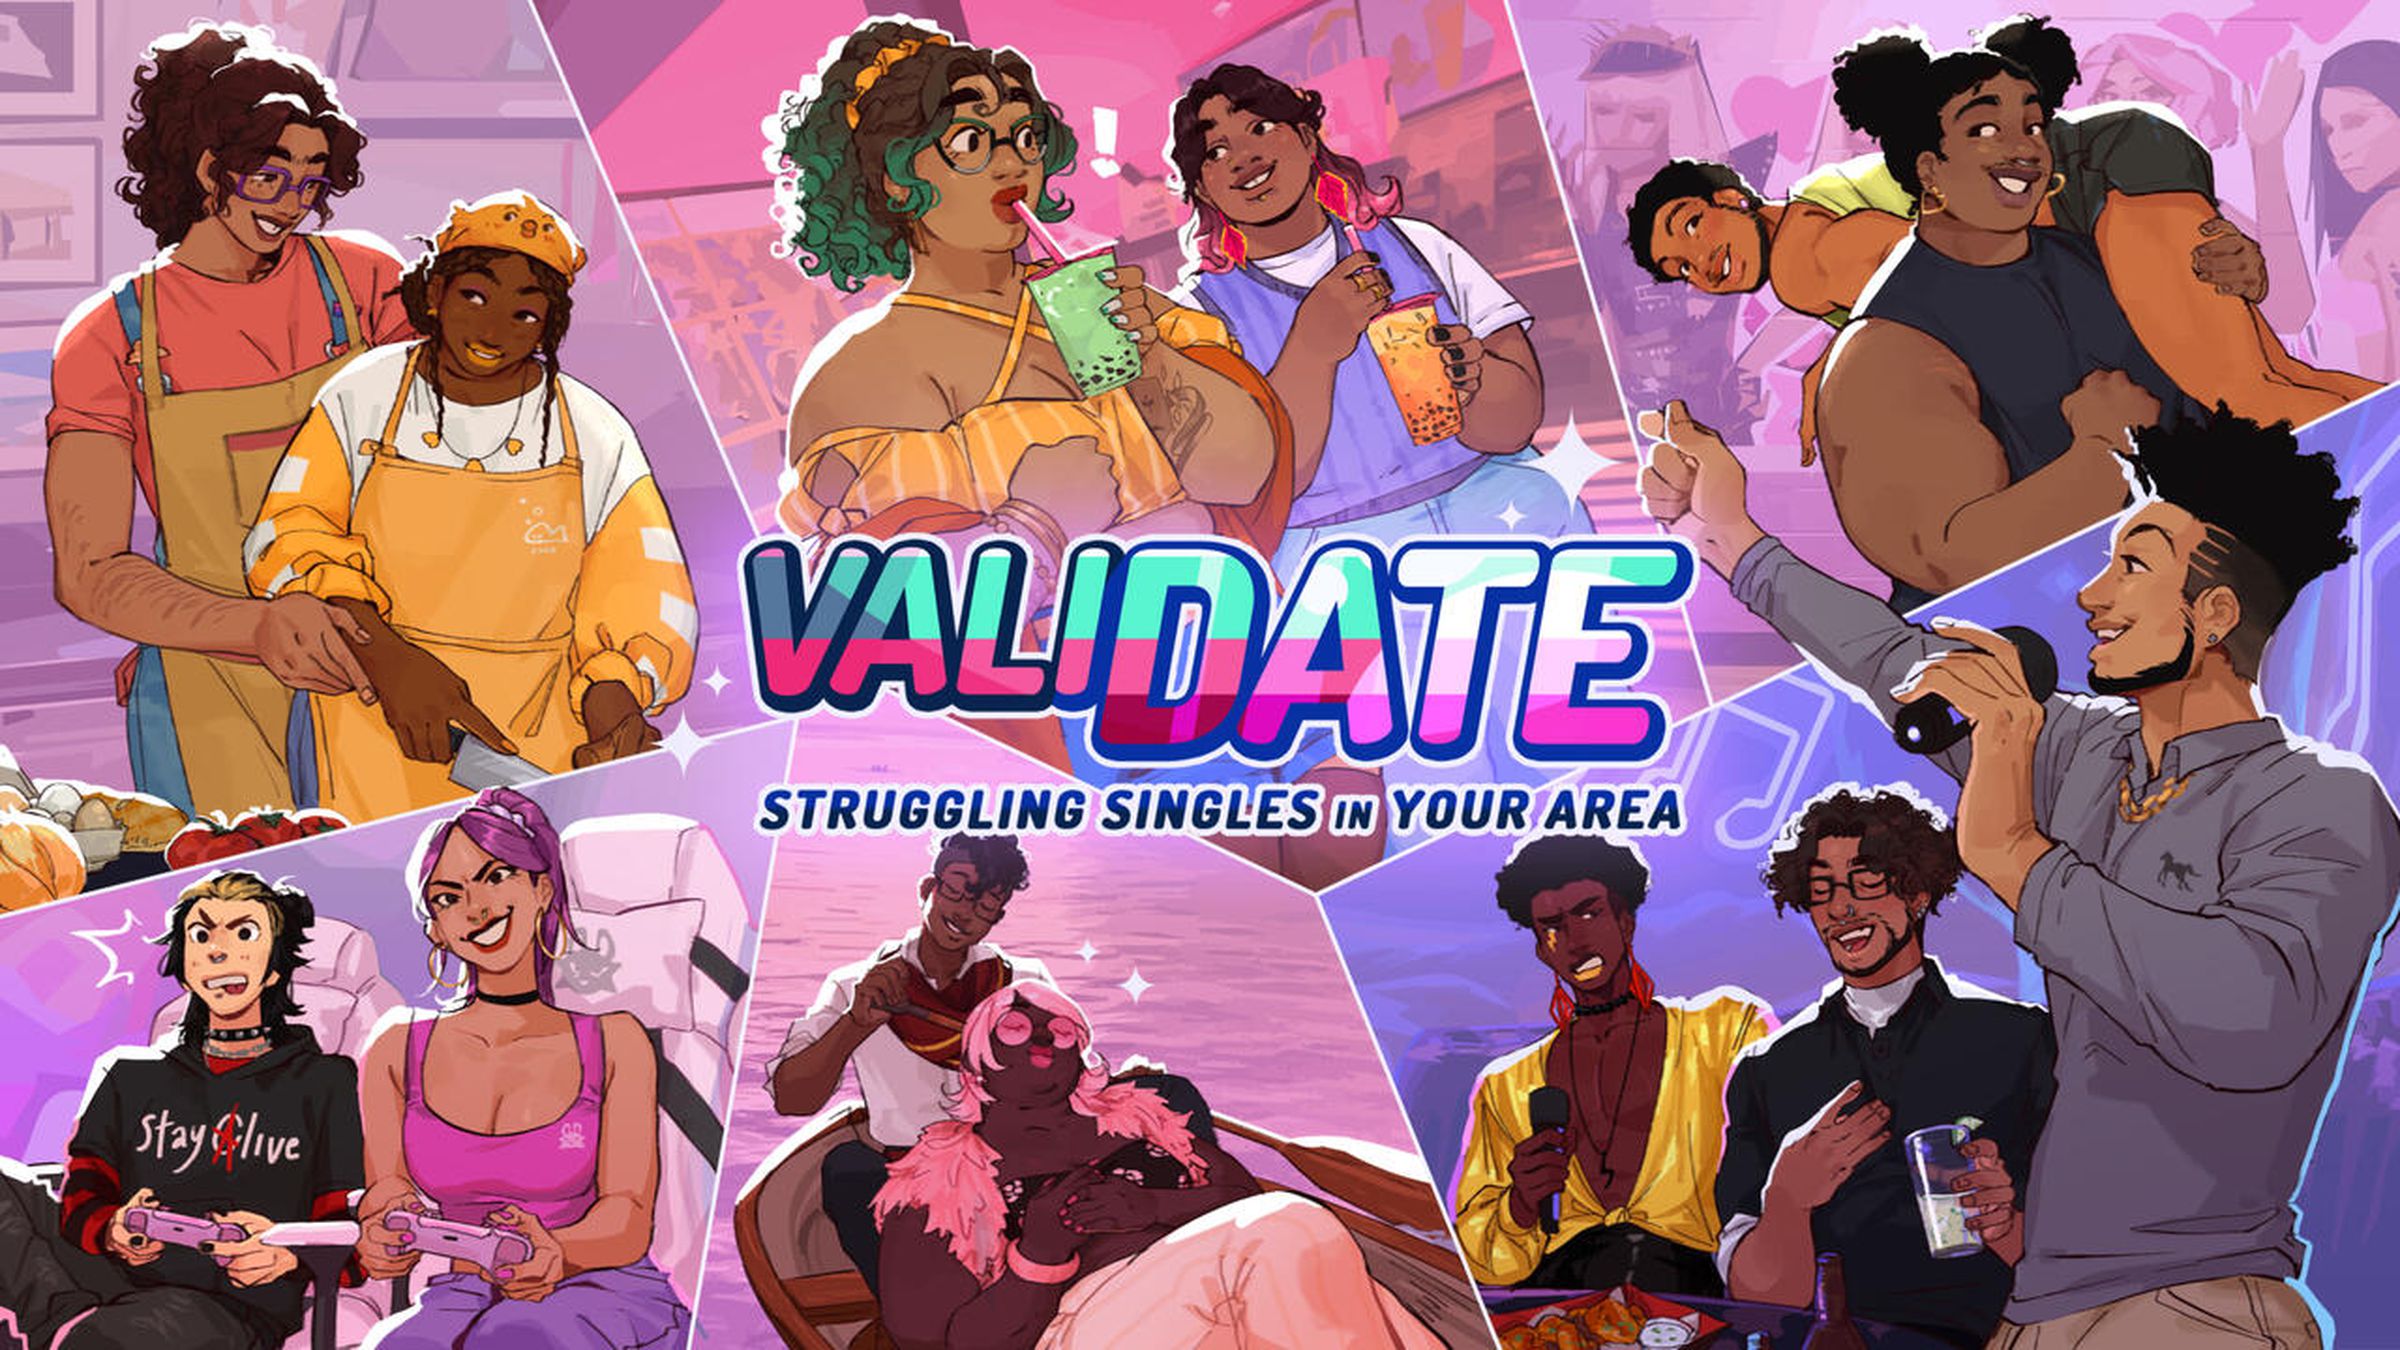 Key art from Validate: Struggling Singles in Your Area